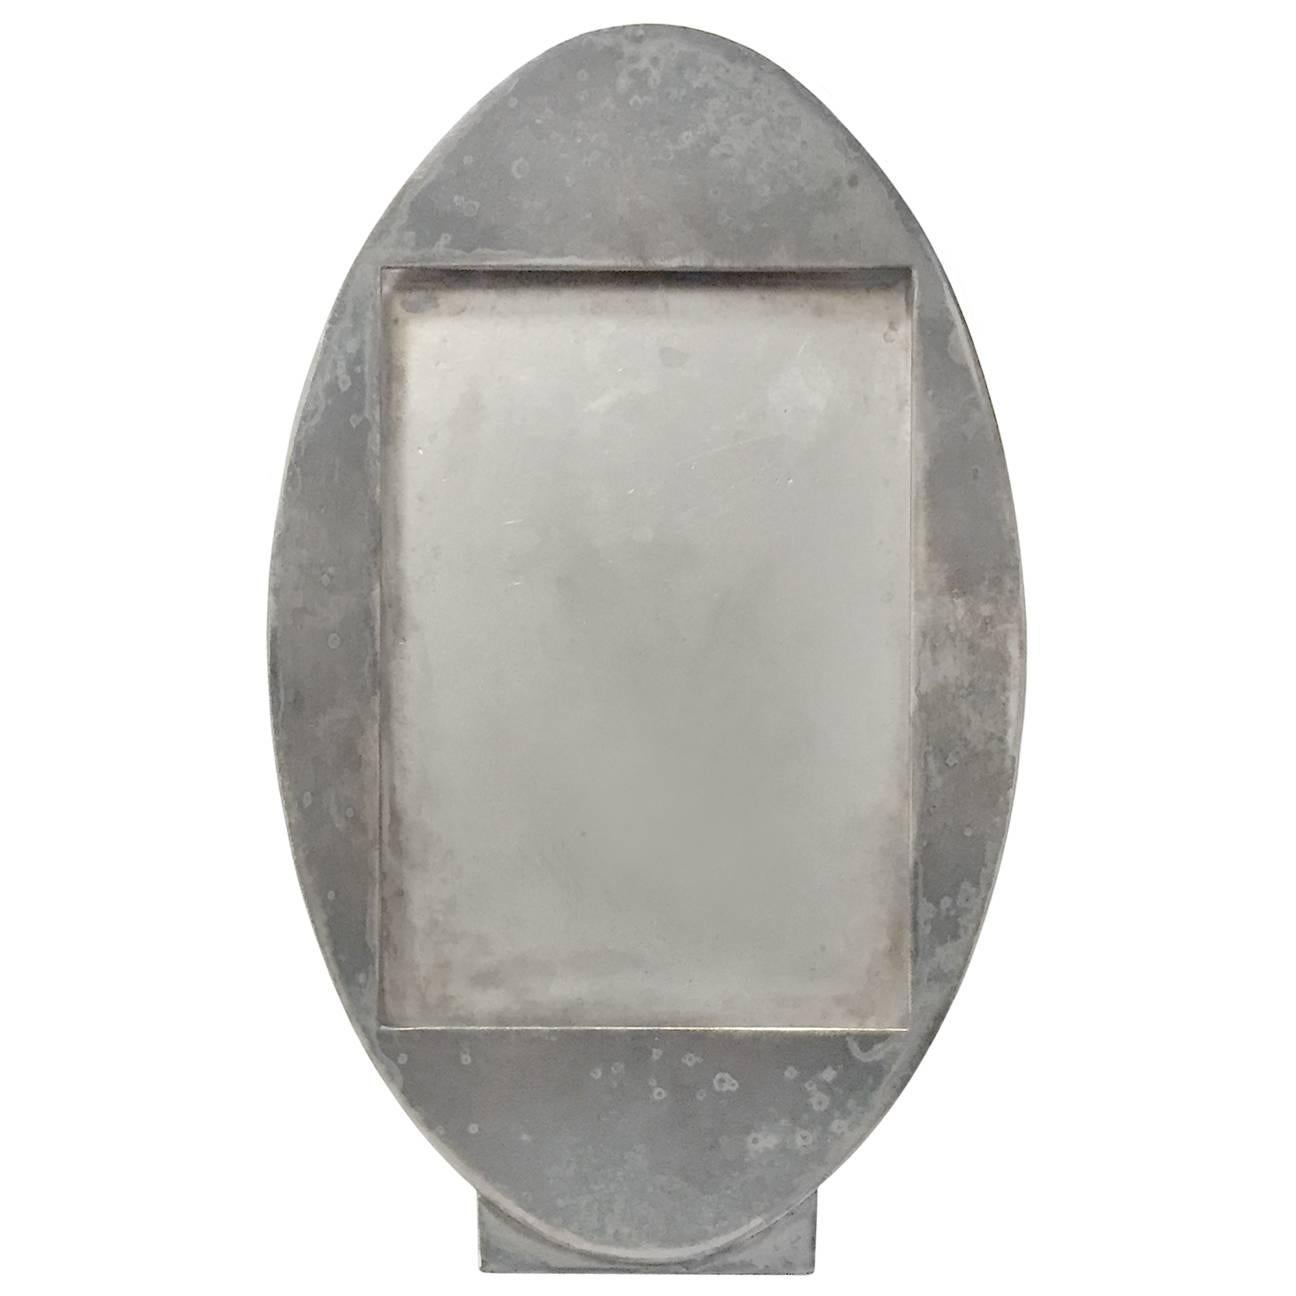 Vertical Silver Plated Oval Picture Frame by Tsao & McKowan for Swid Powell